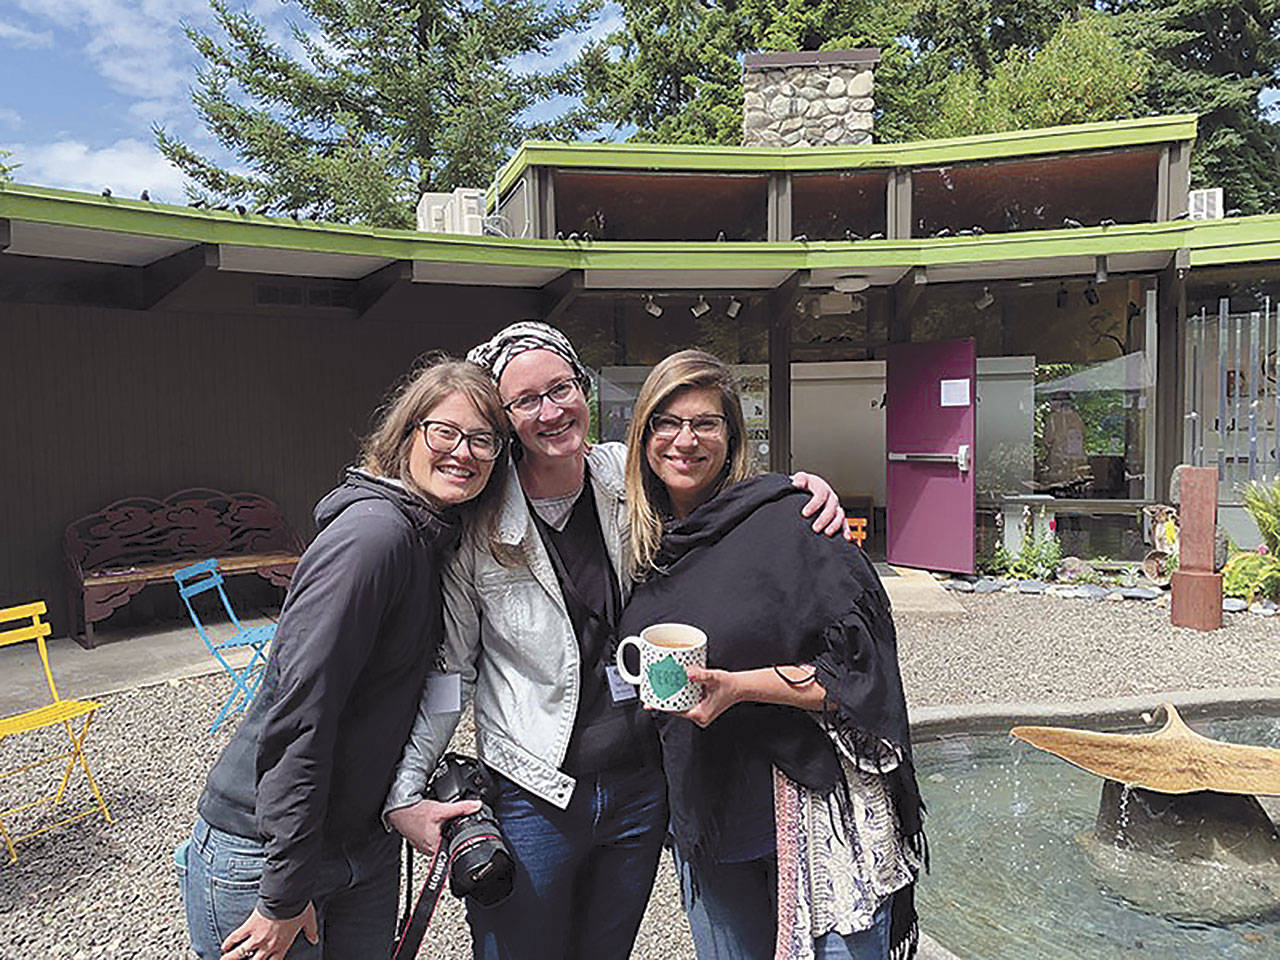 The Port Angeles Fine Arts Center staff is pictured at the 2019 Summertide Festival. From left are Lauren Bailey, community outreach coordinator; Sarah Jane, gallery and program director; and Jessica Elliott, executive director. (Courtesy photo)